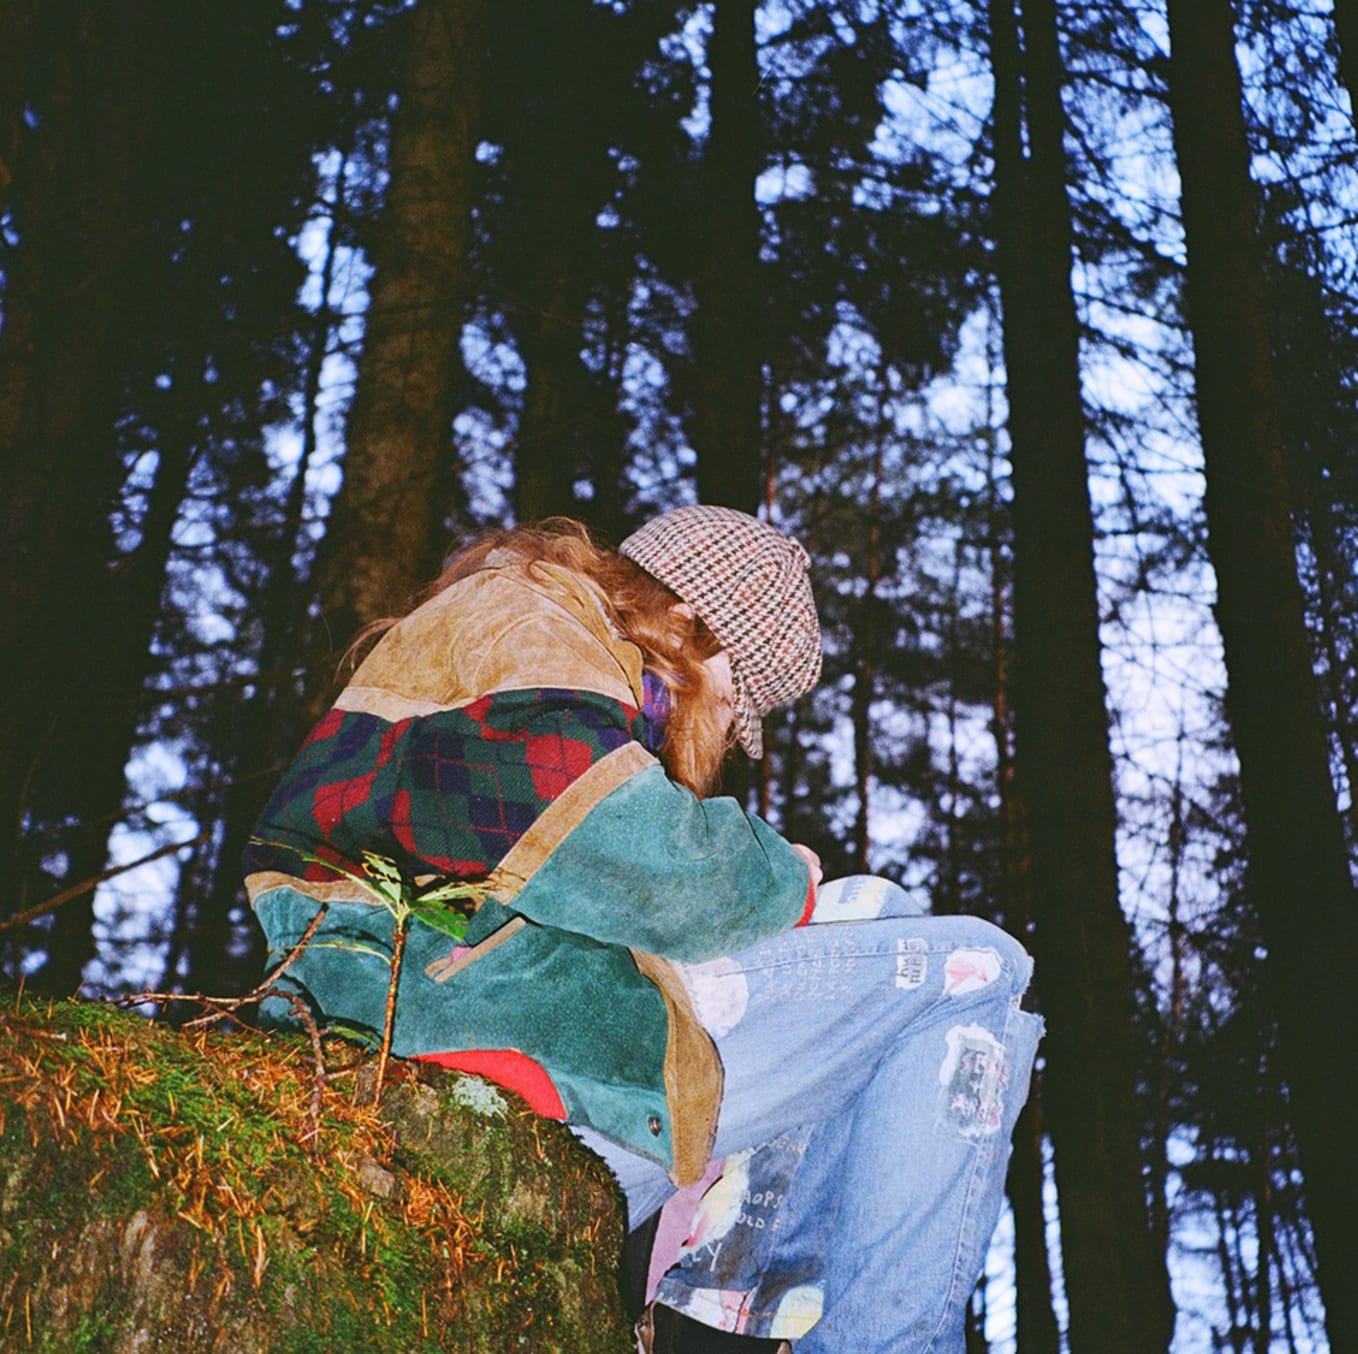 Image of artist sitting in a forest at dusk.